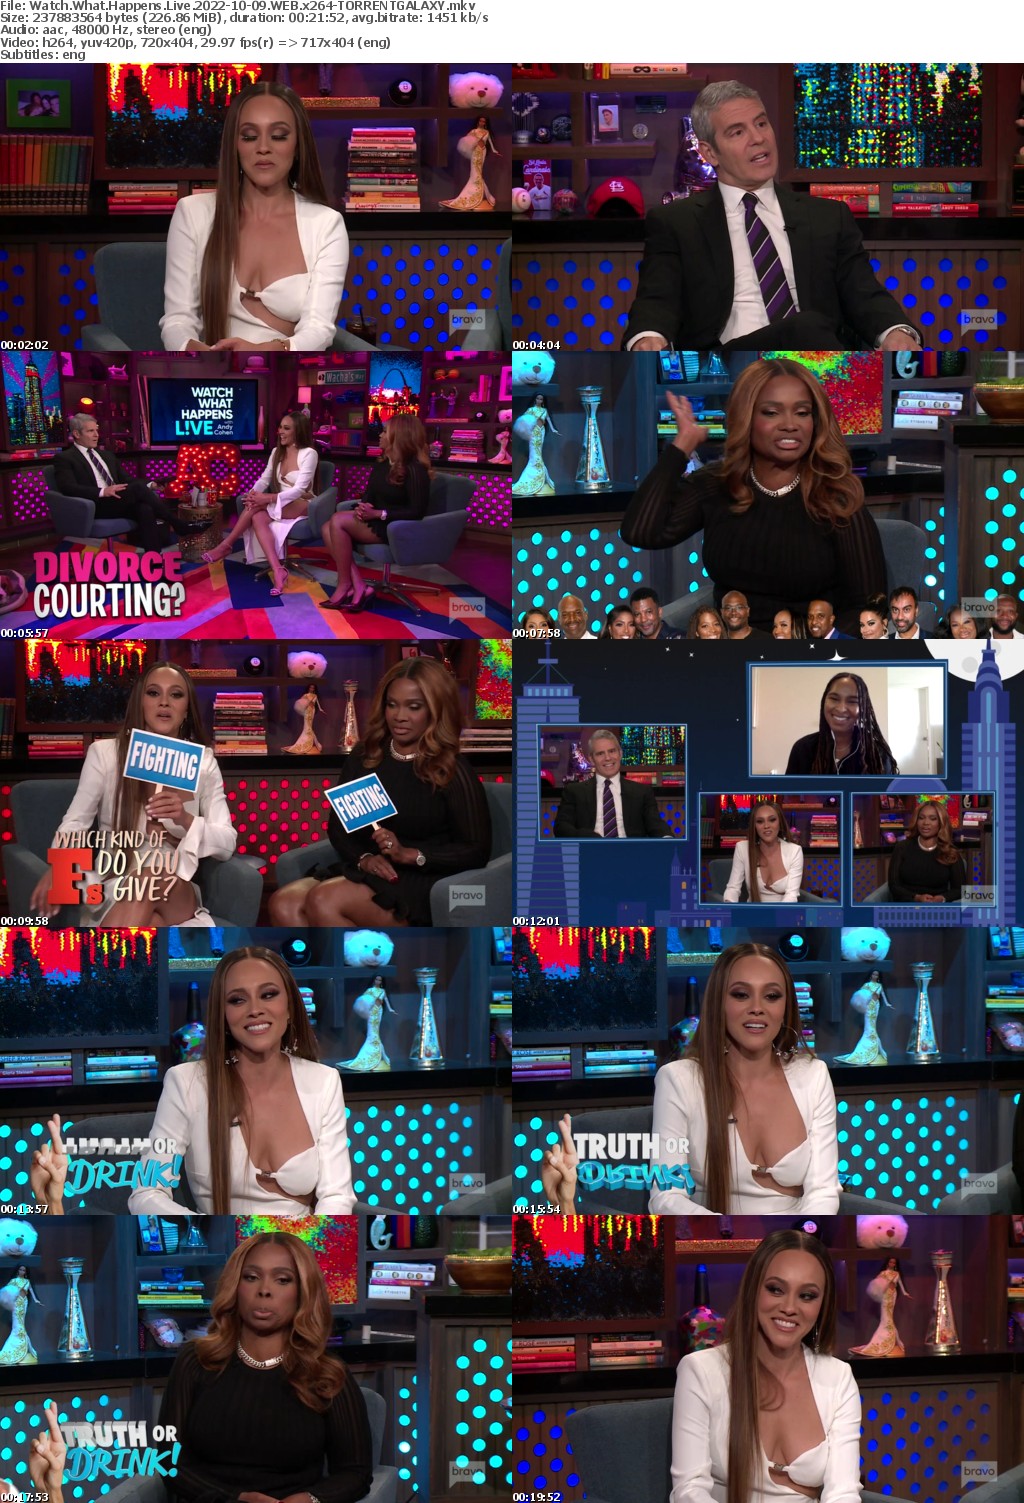 Watch What Happens Live 2022-10-09 WEB x264-GALAXY